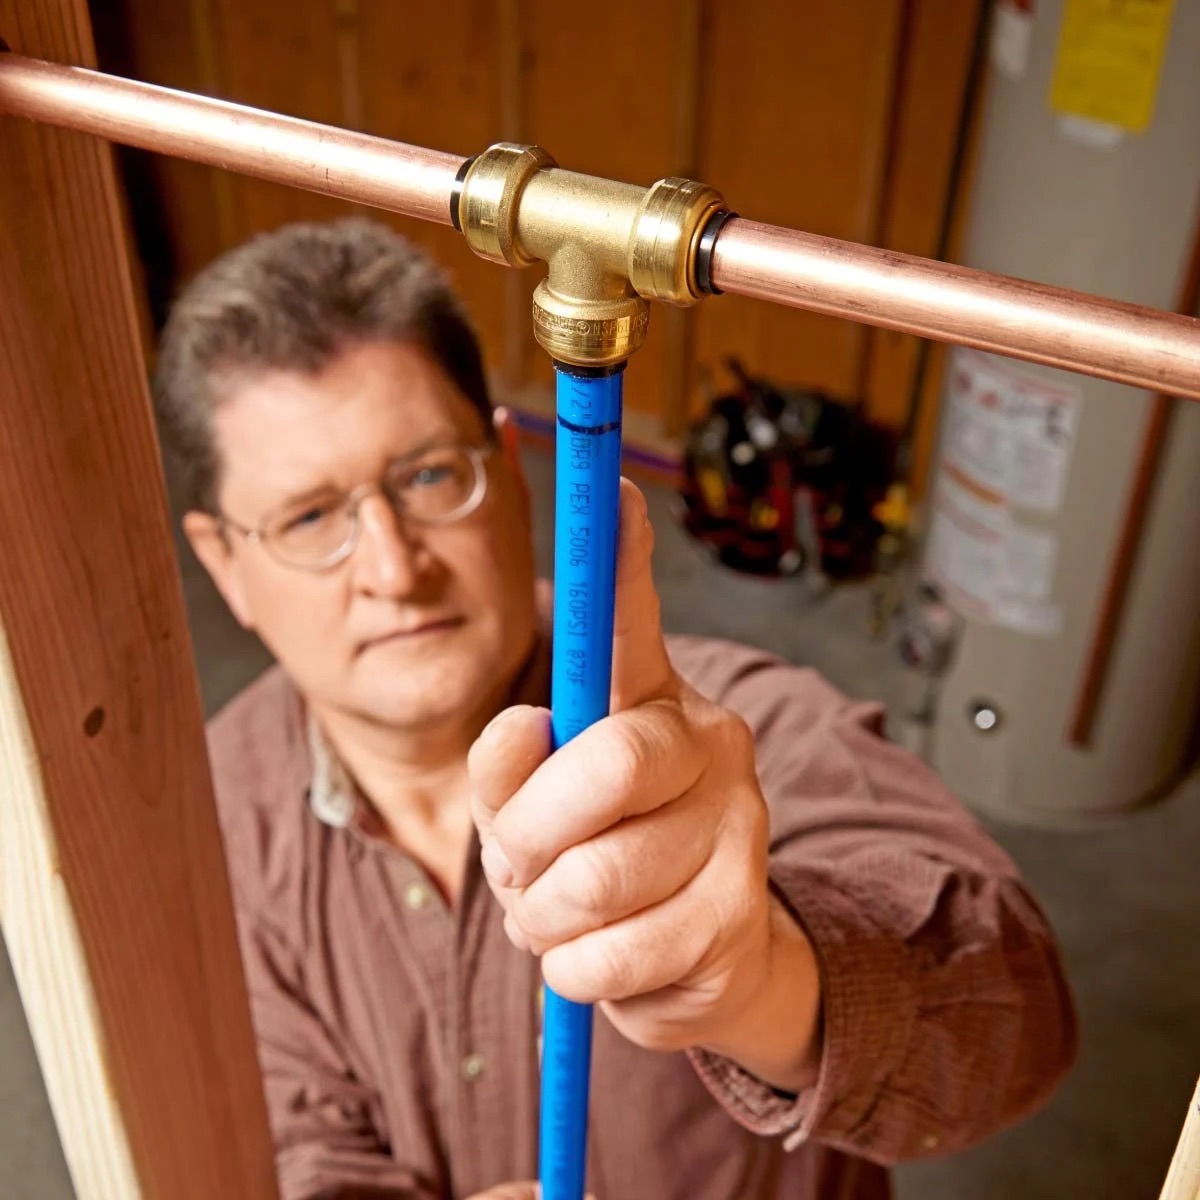 How To Put Plumbing Pipes Together